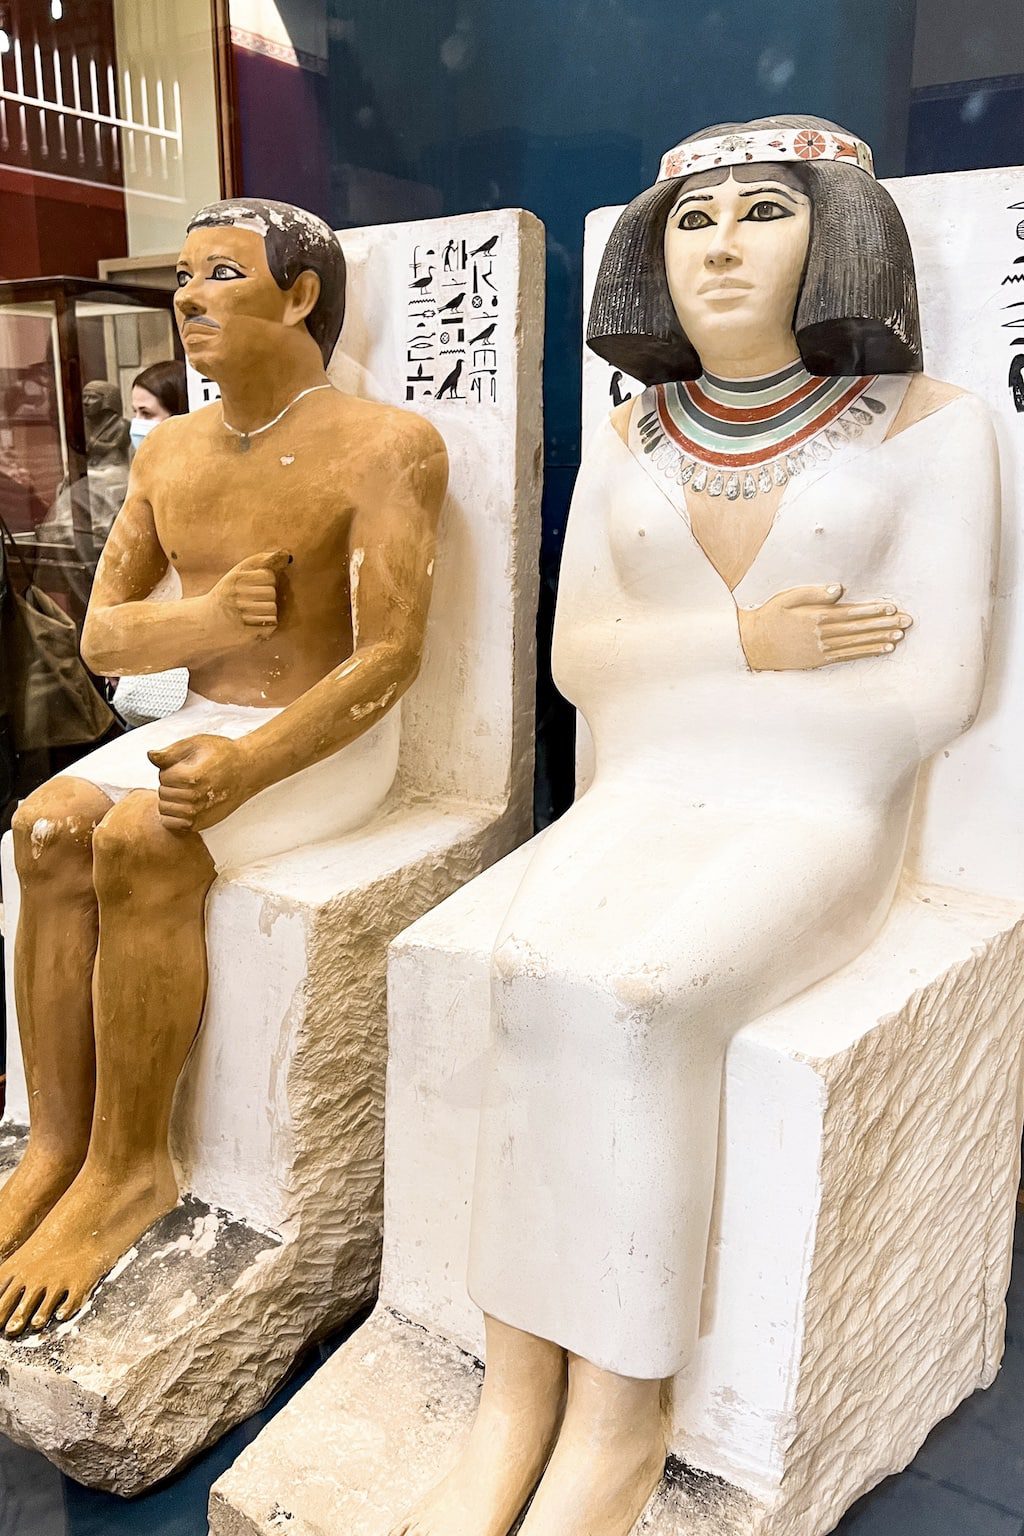 Places to Visit in Cairo: Great Egyptian Museum